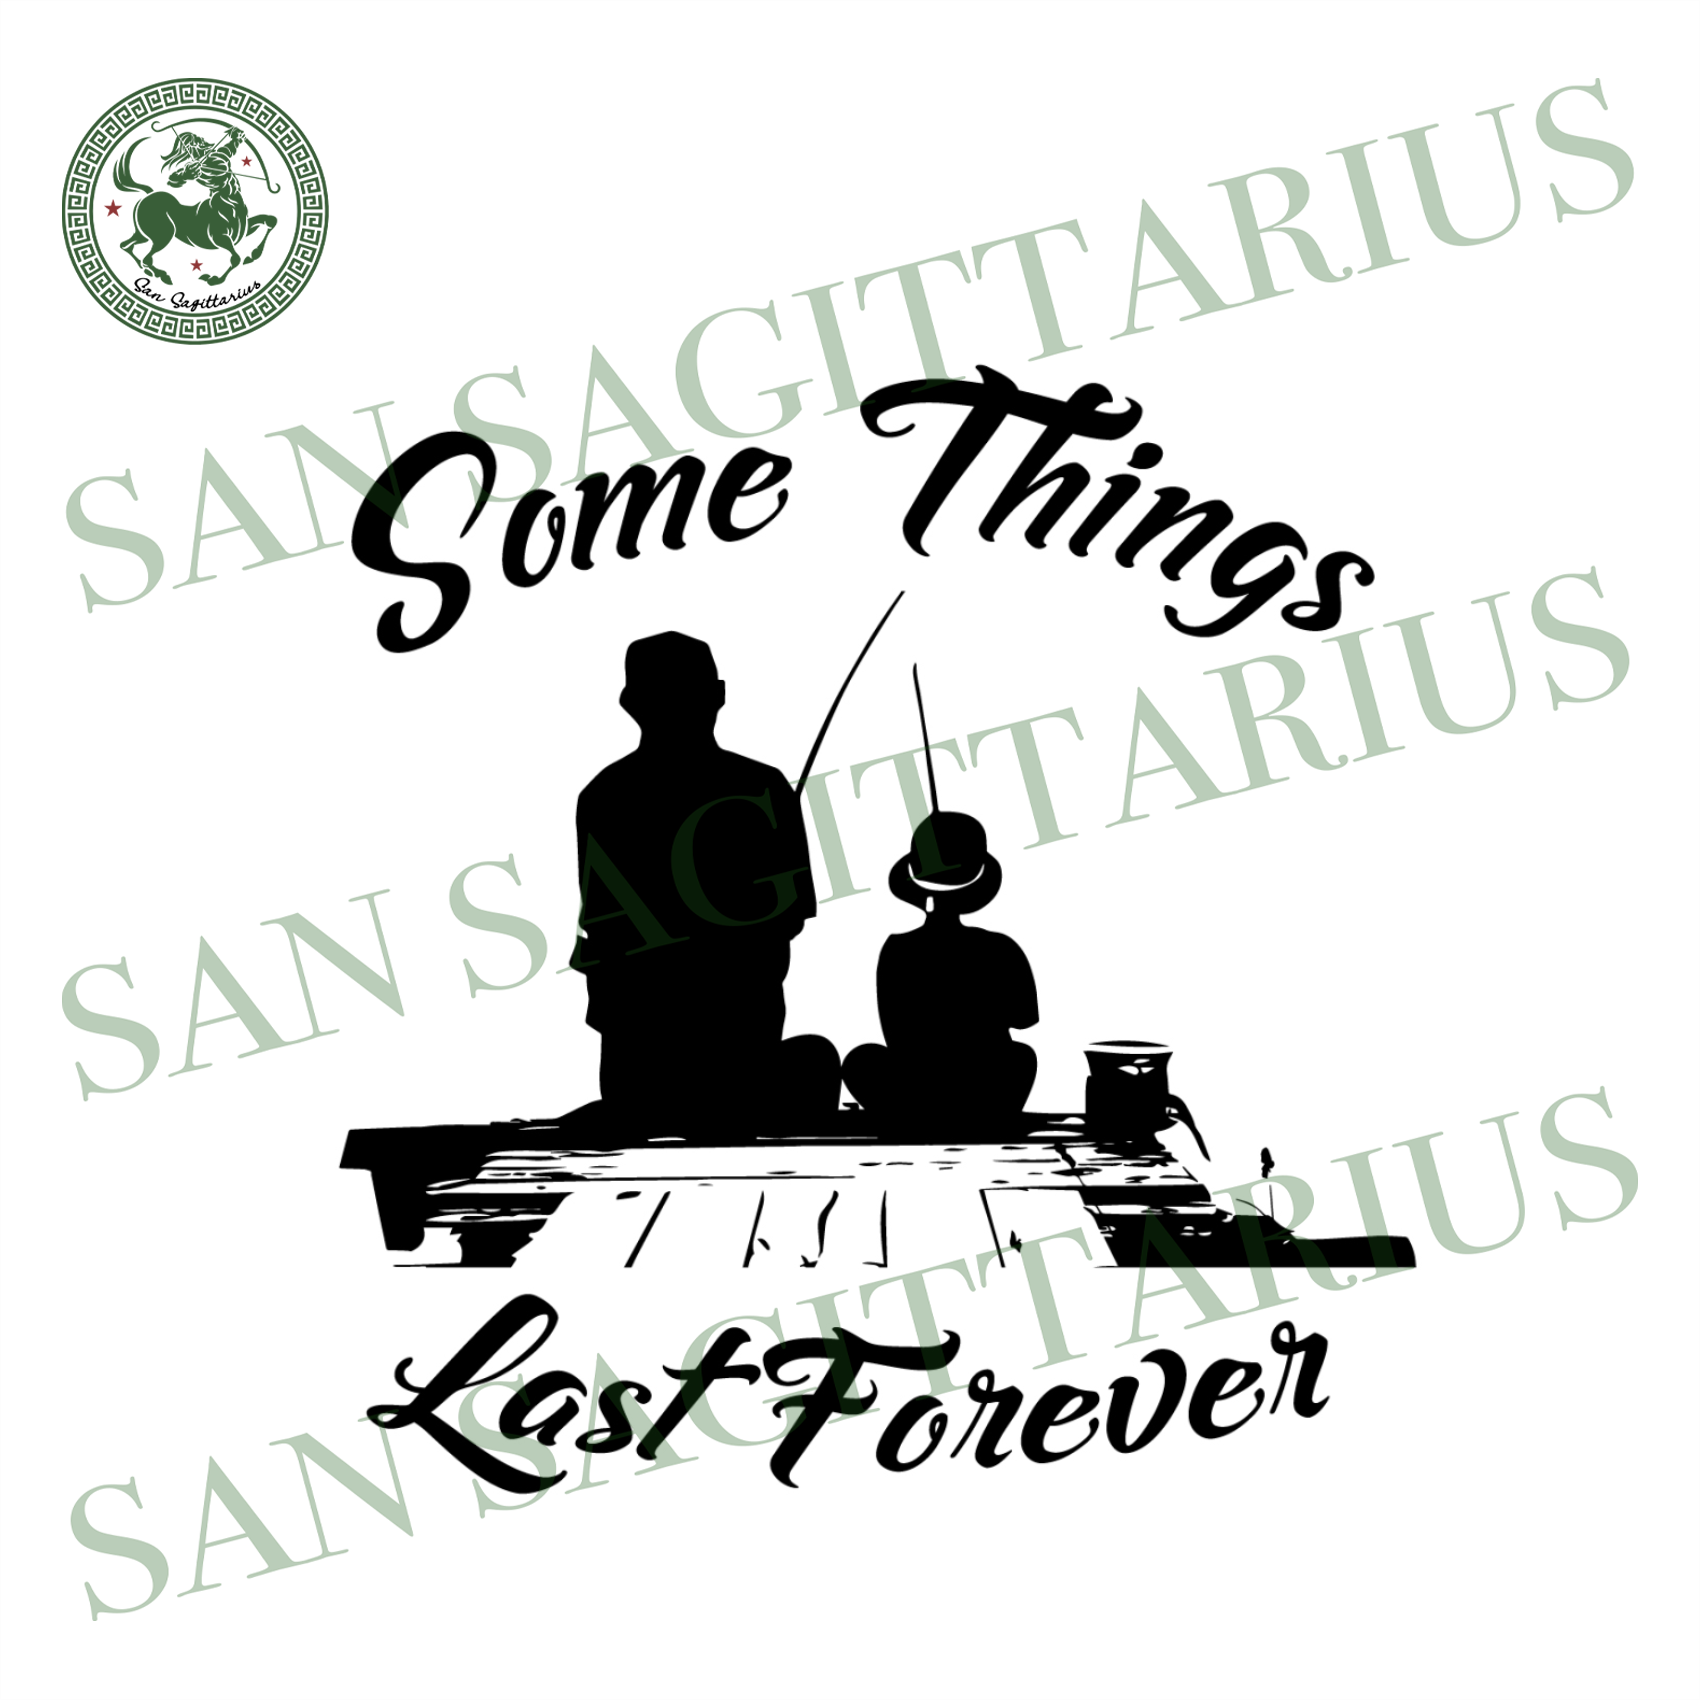 Download Some Things Last Forever Svg Fathers Day Svg Father And Son Fishing San Sagittarius